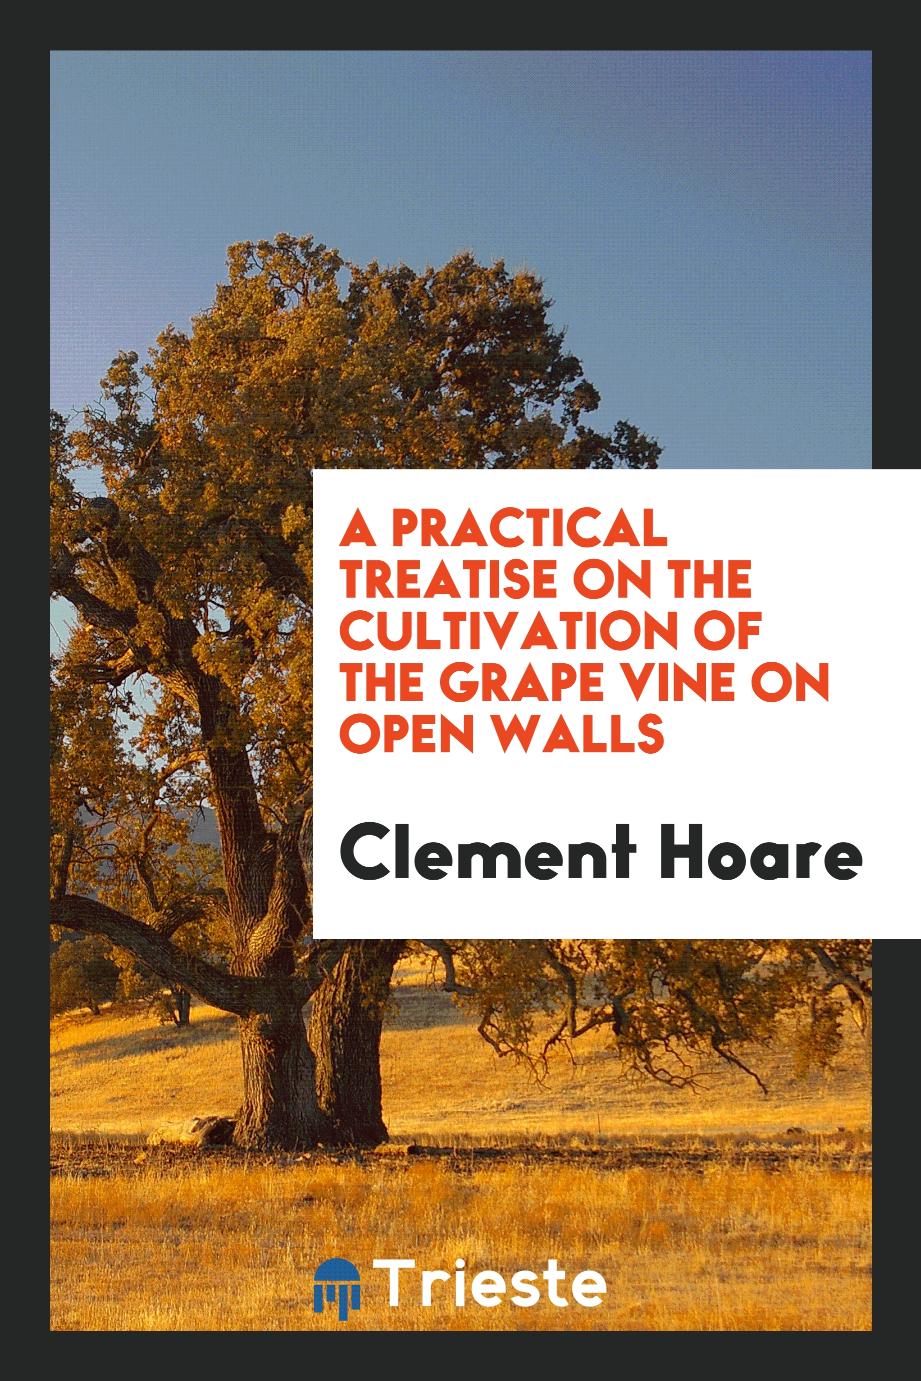 A practical treatise on the cultivation of the grape vine on open walls